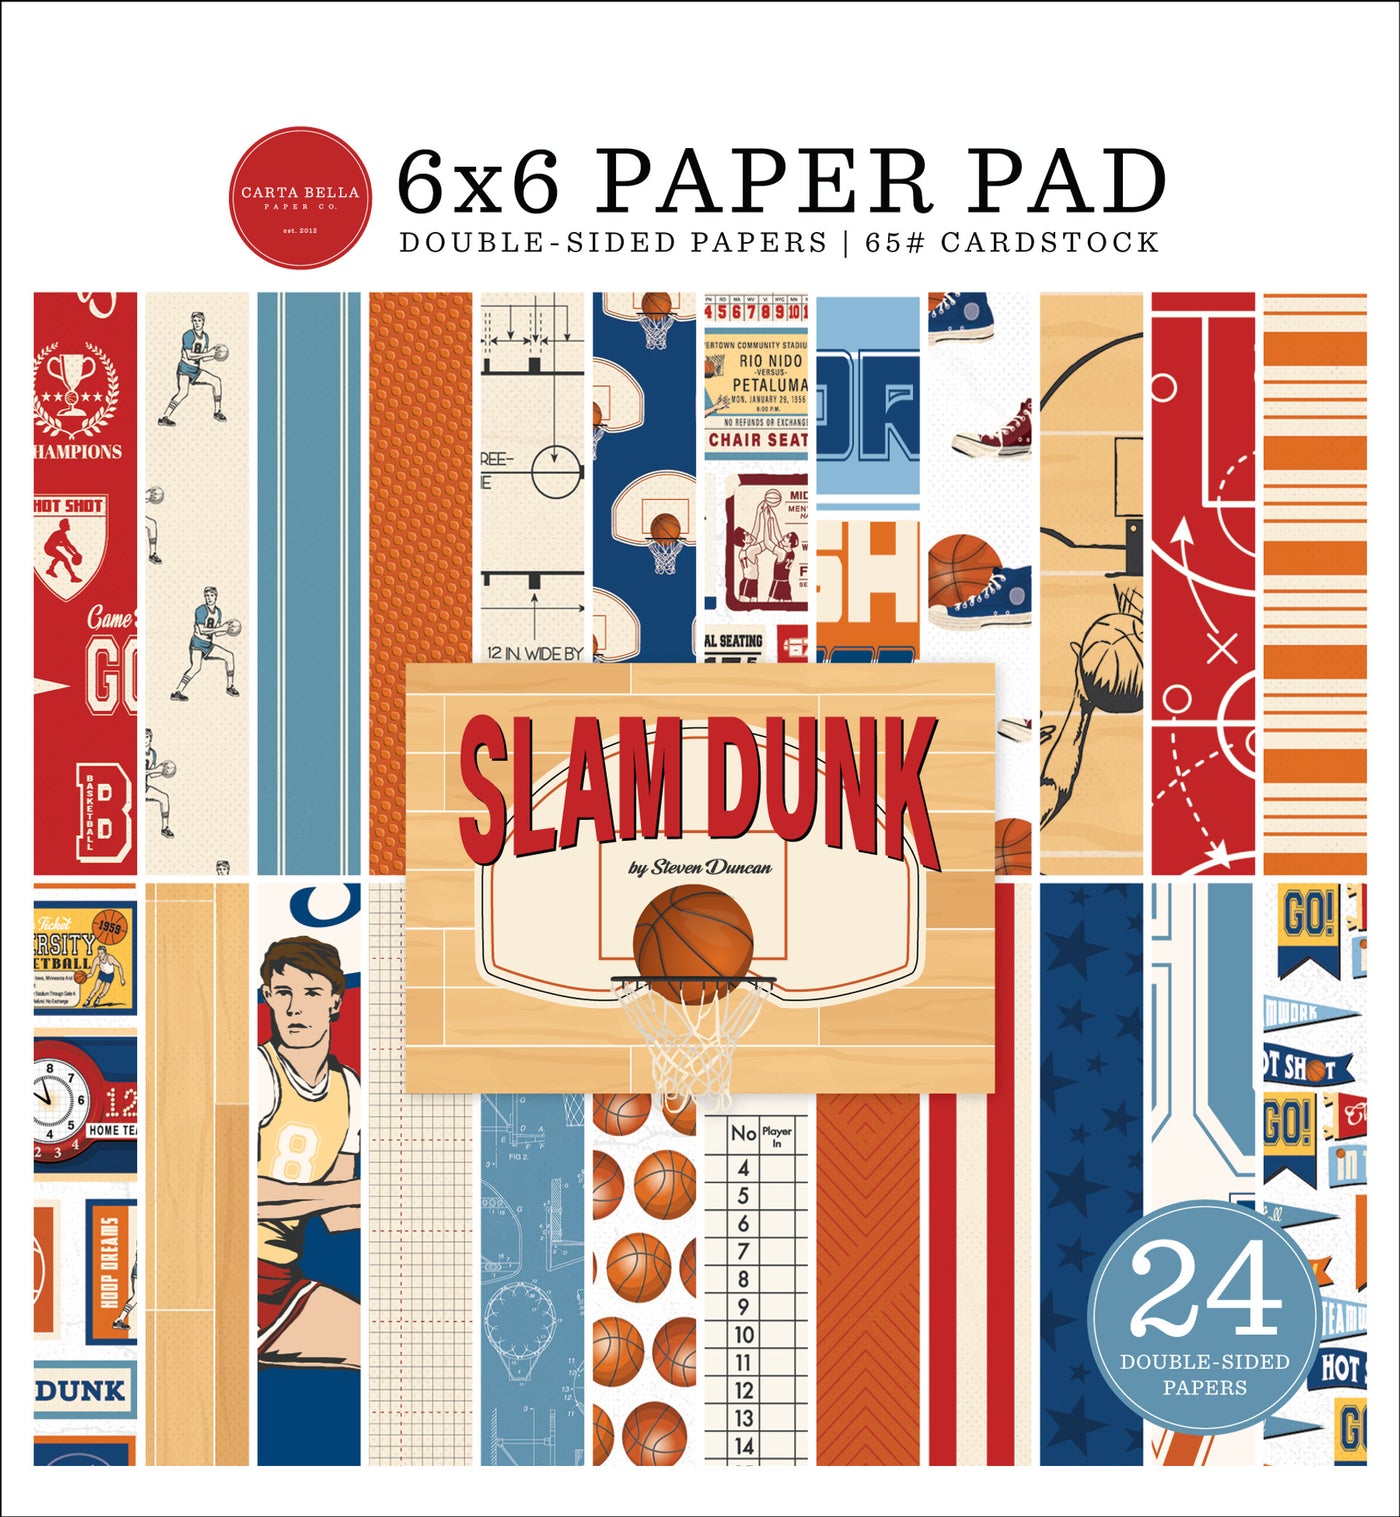 6x6 pad with 24 double-sided sheets. Scaled-down images are great for card making and similar crafts. This pad features basketball prints and colors.